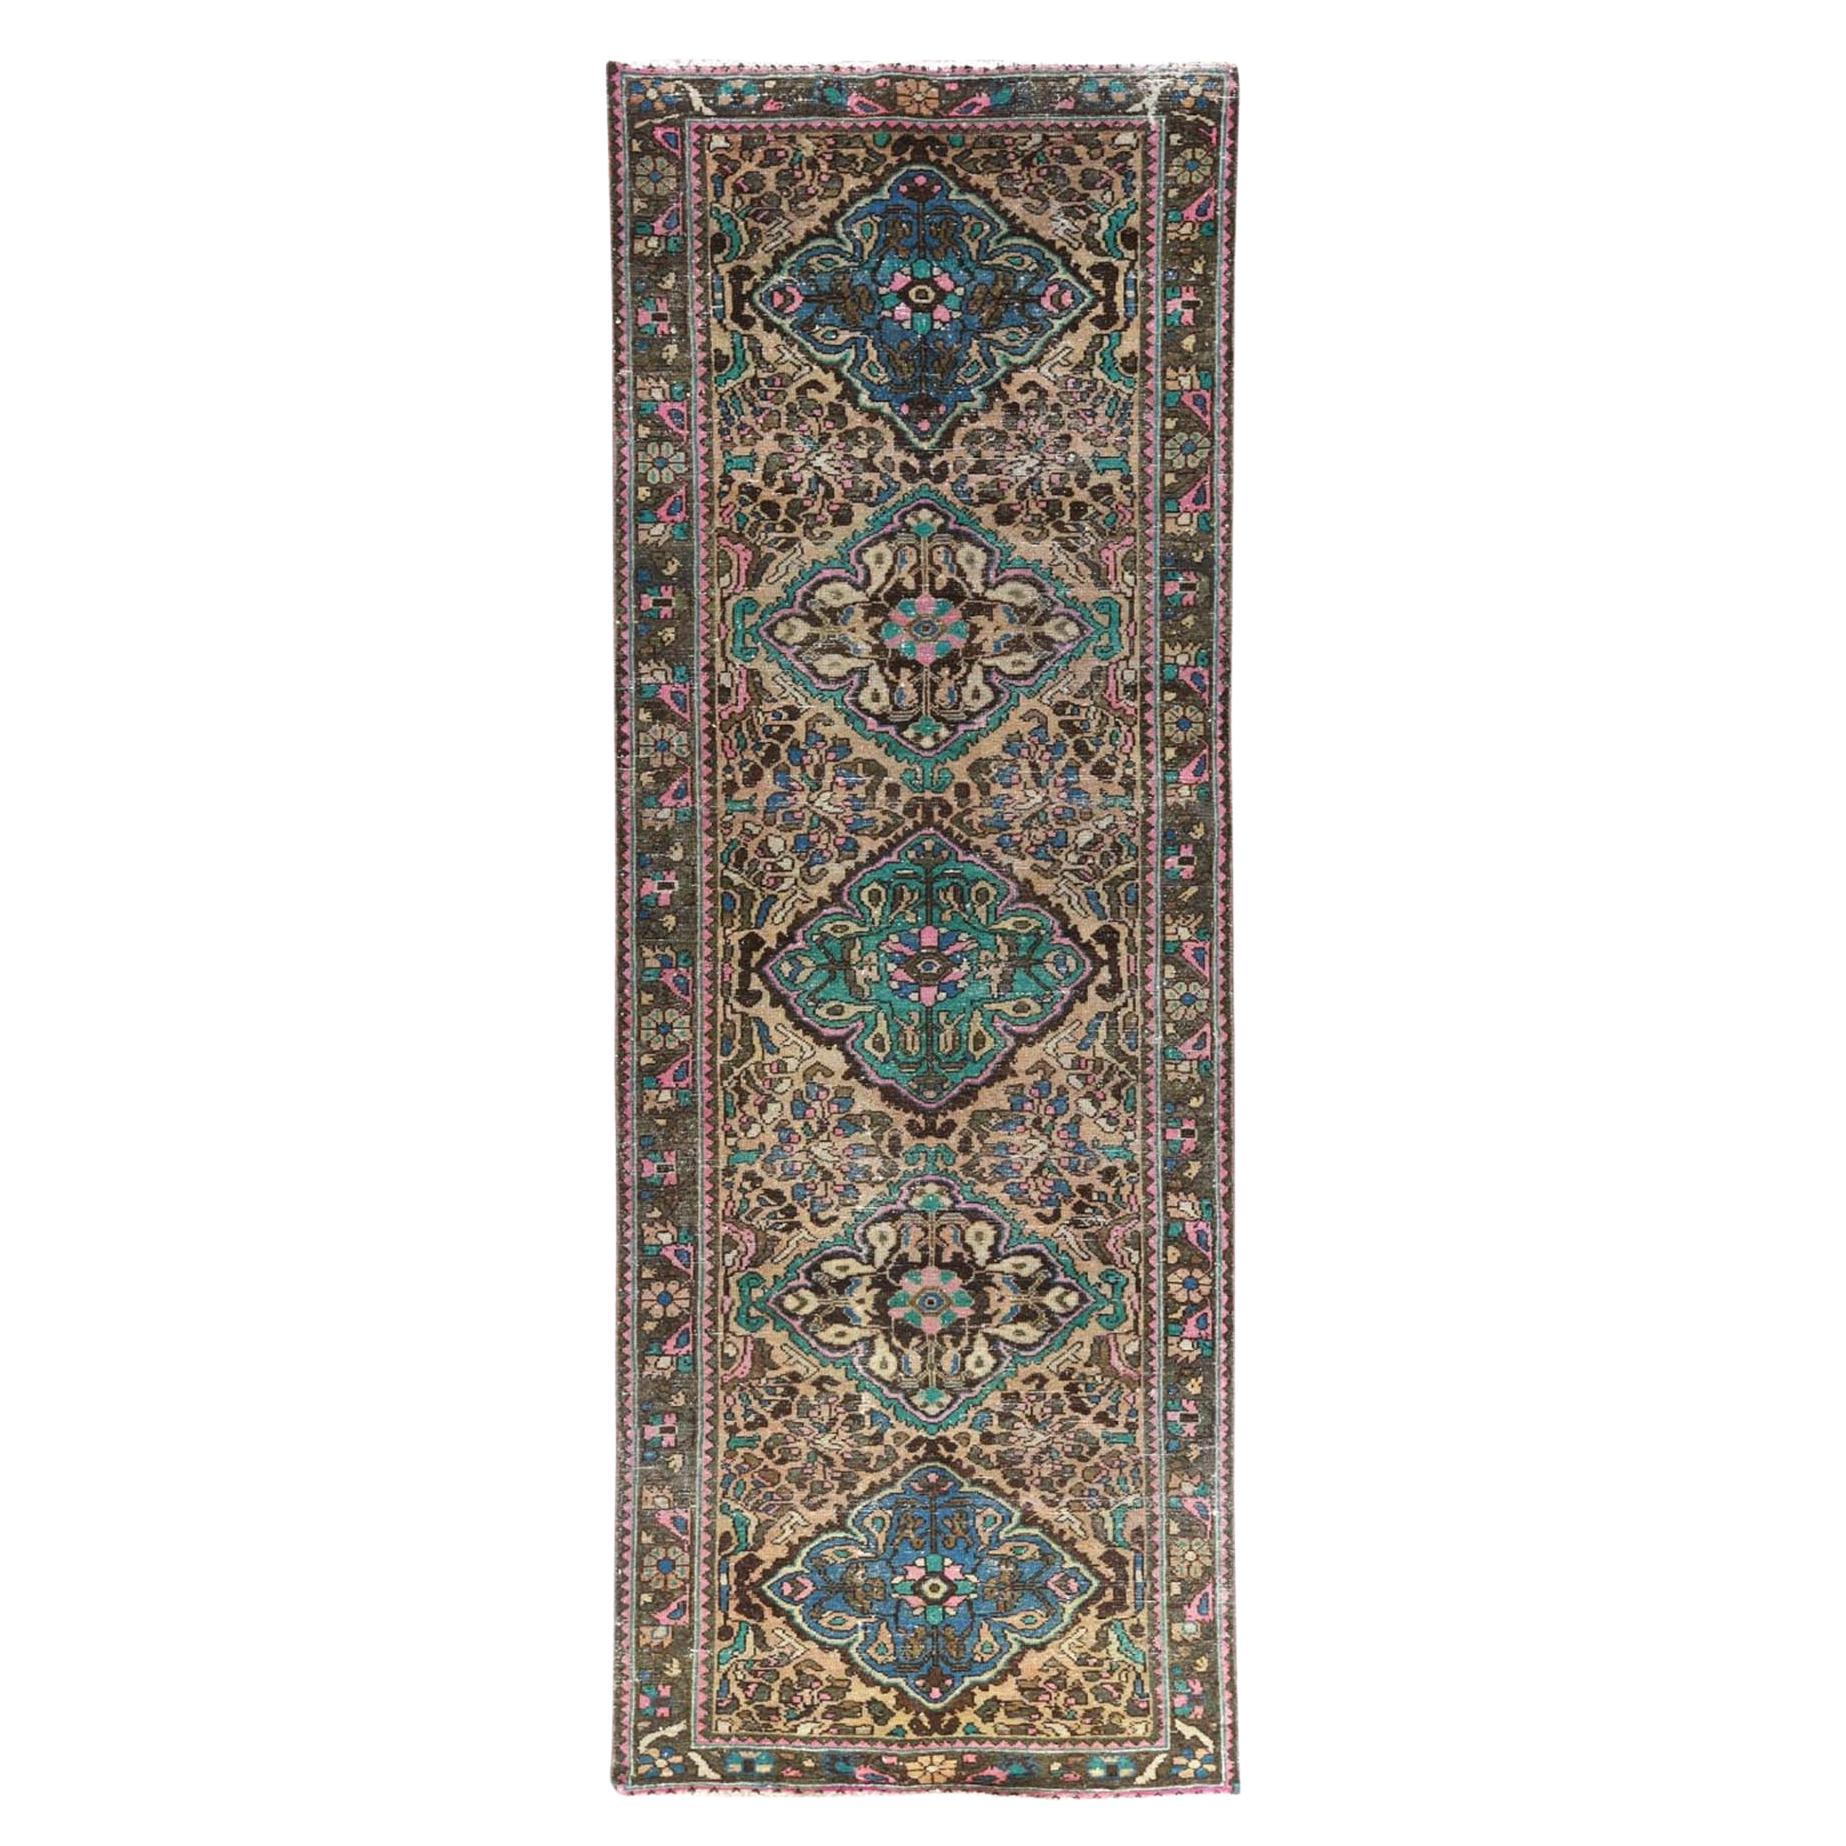 Green with Touches of Pink, Worn Wool Hand Knotted, Vintage Persian Bakhtiar Rug